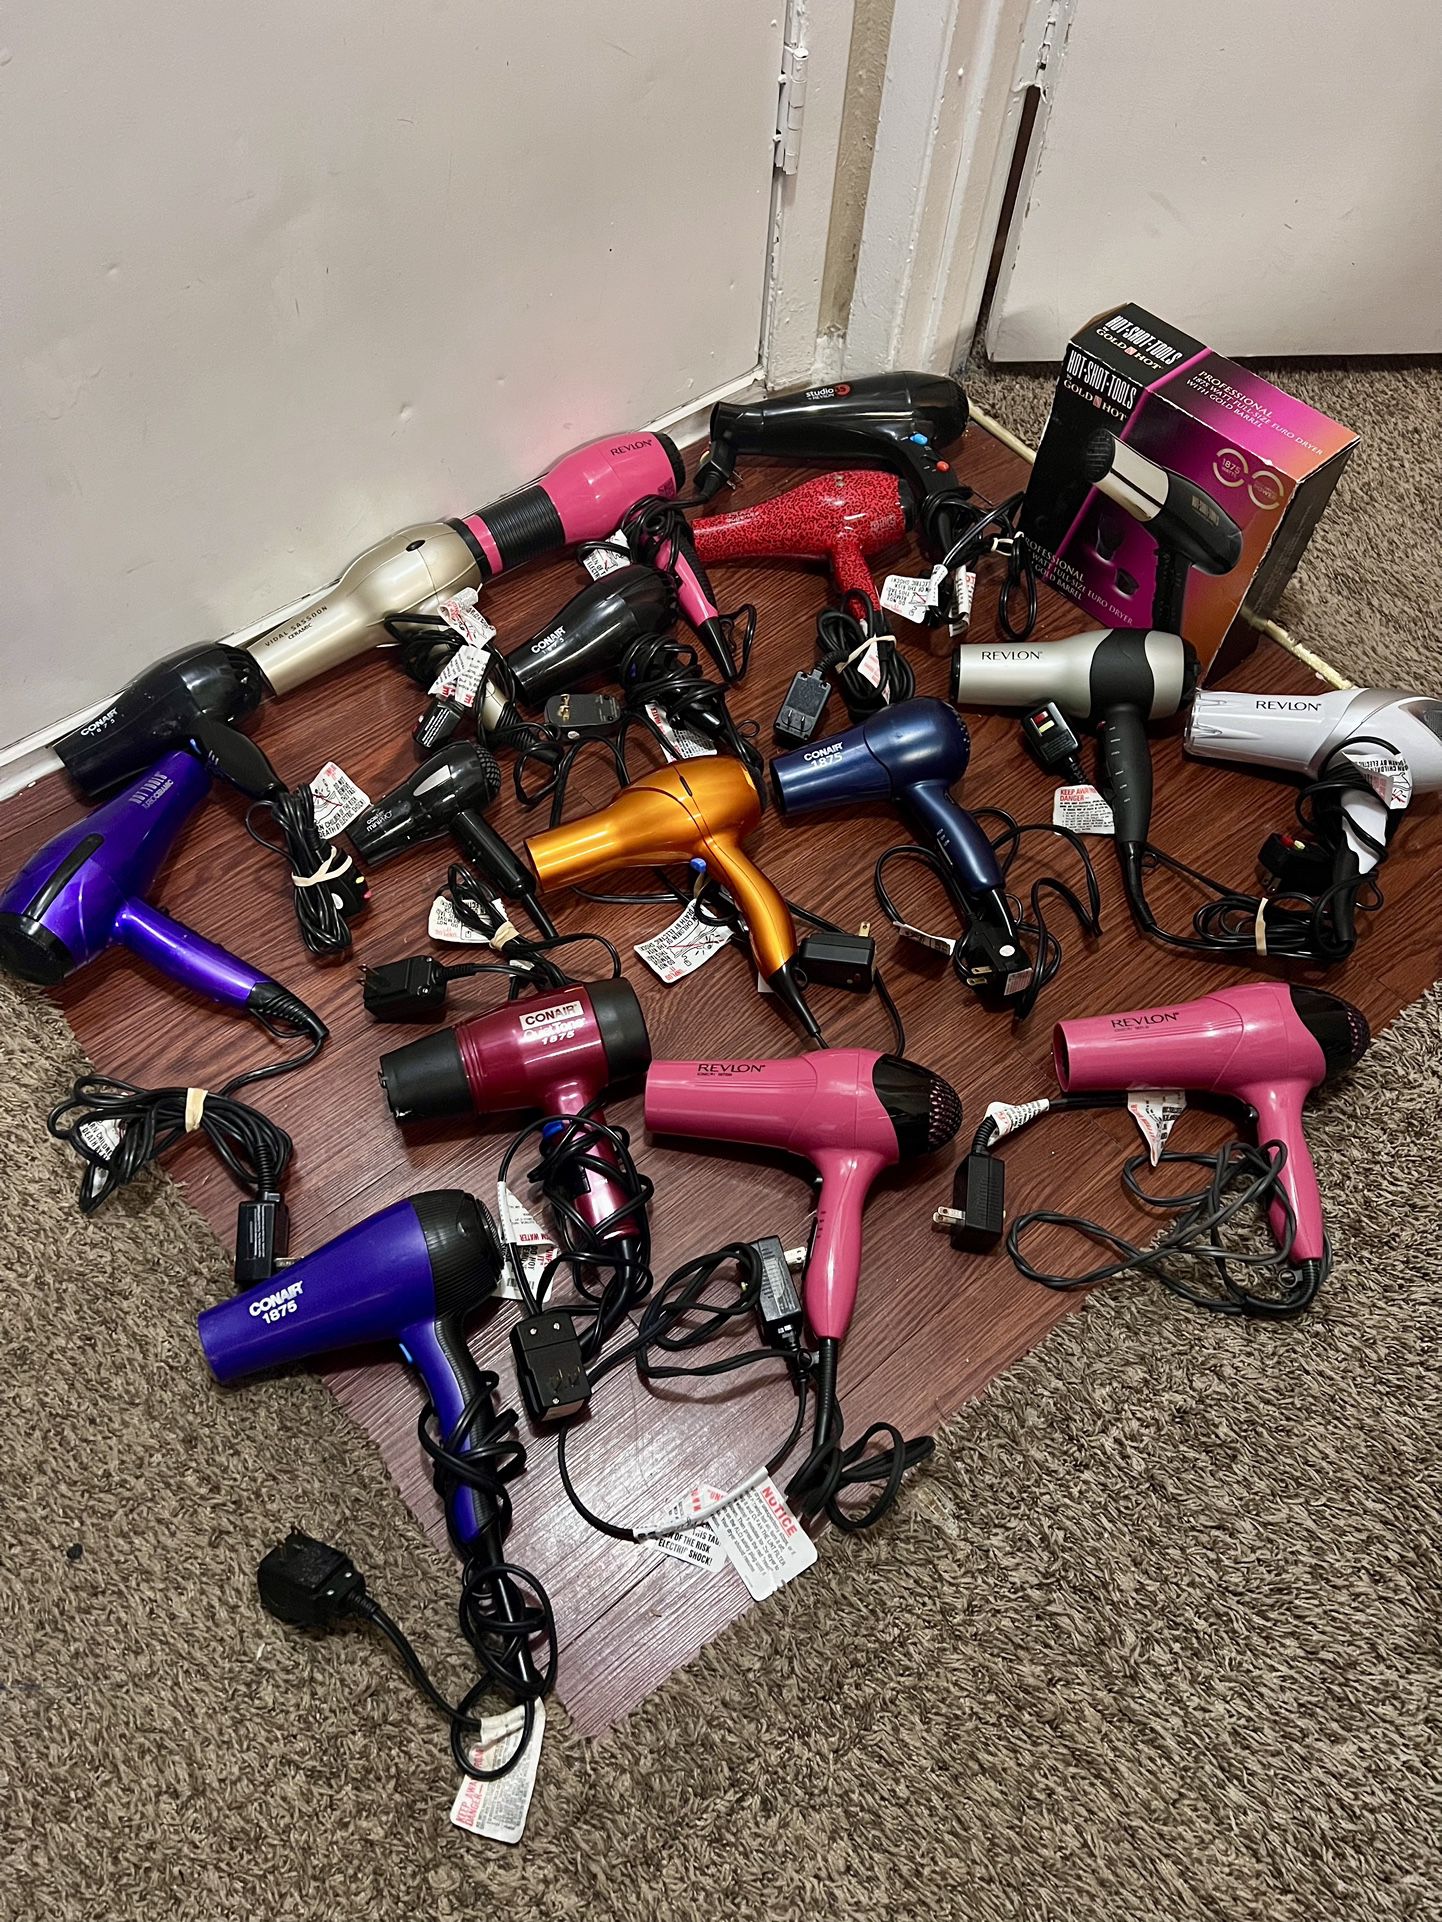 Hair Dryers All Like New 12-15$ For Each 